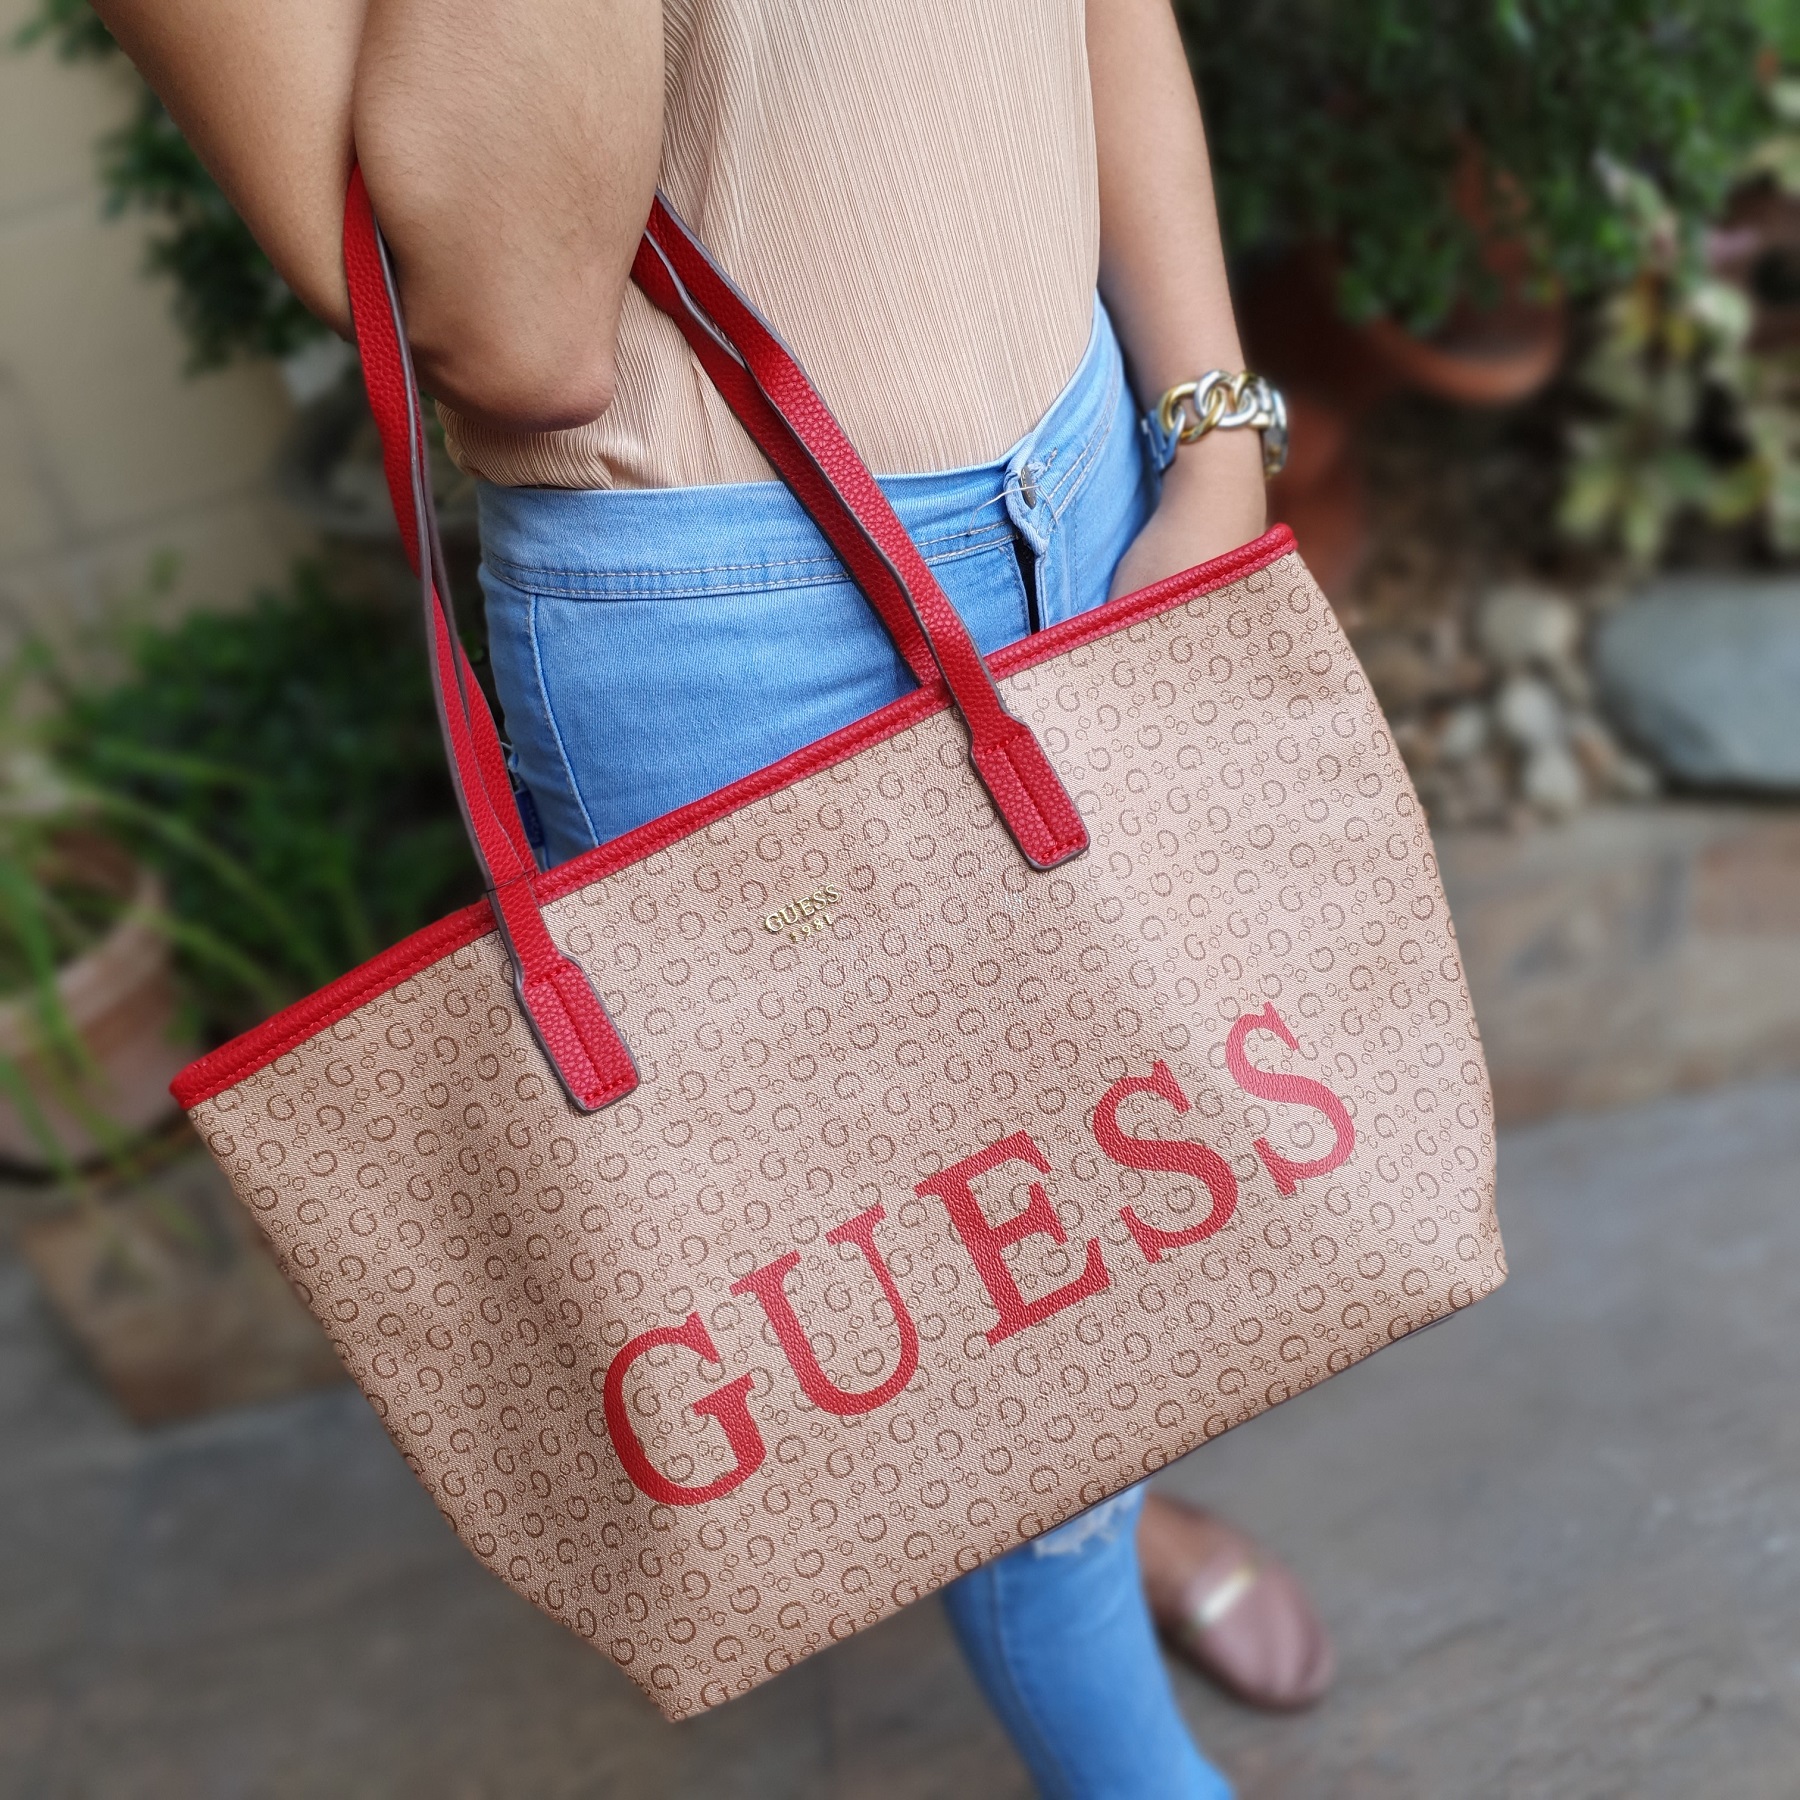 Authentic Guess Women's Classic Tote Bag Vikky with Print Brand in